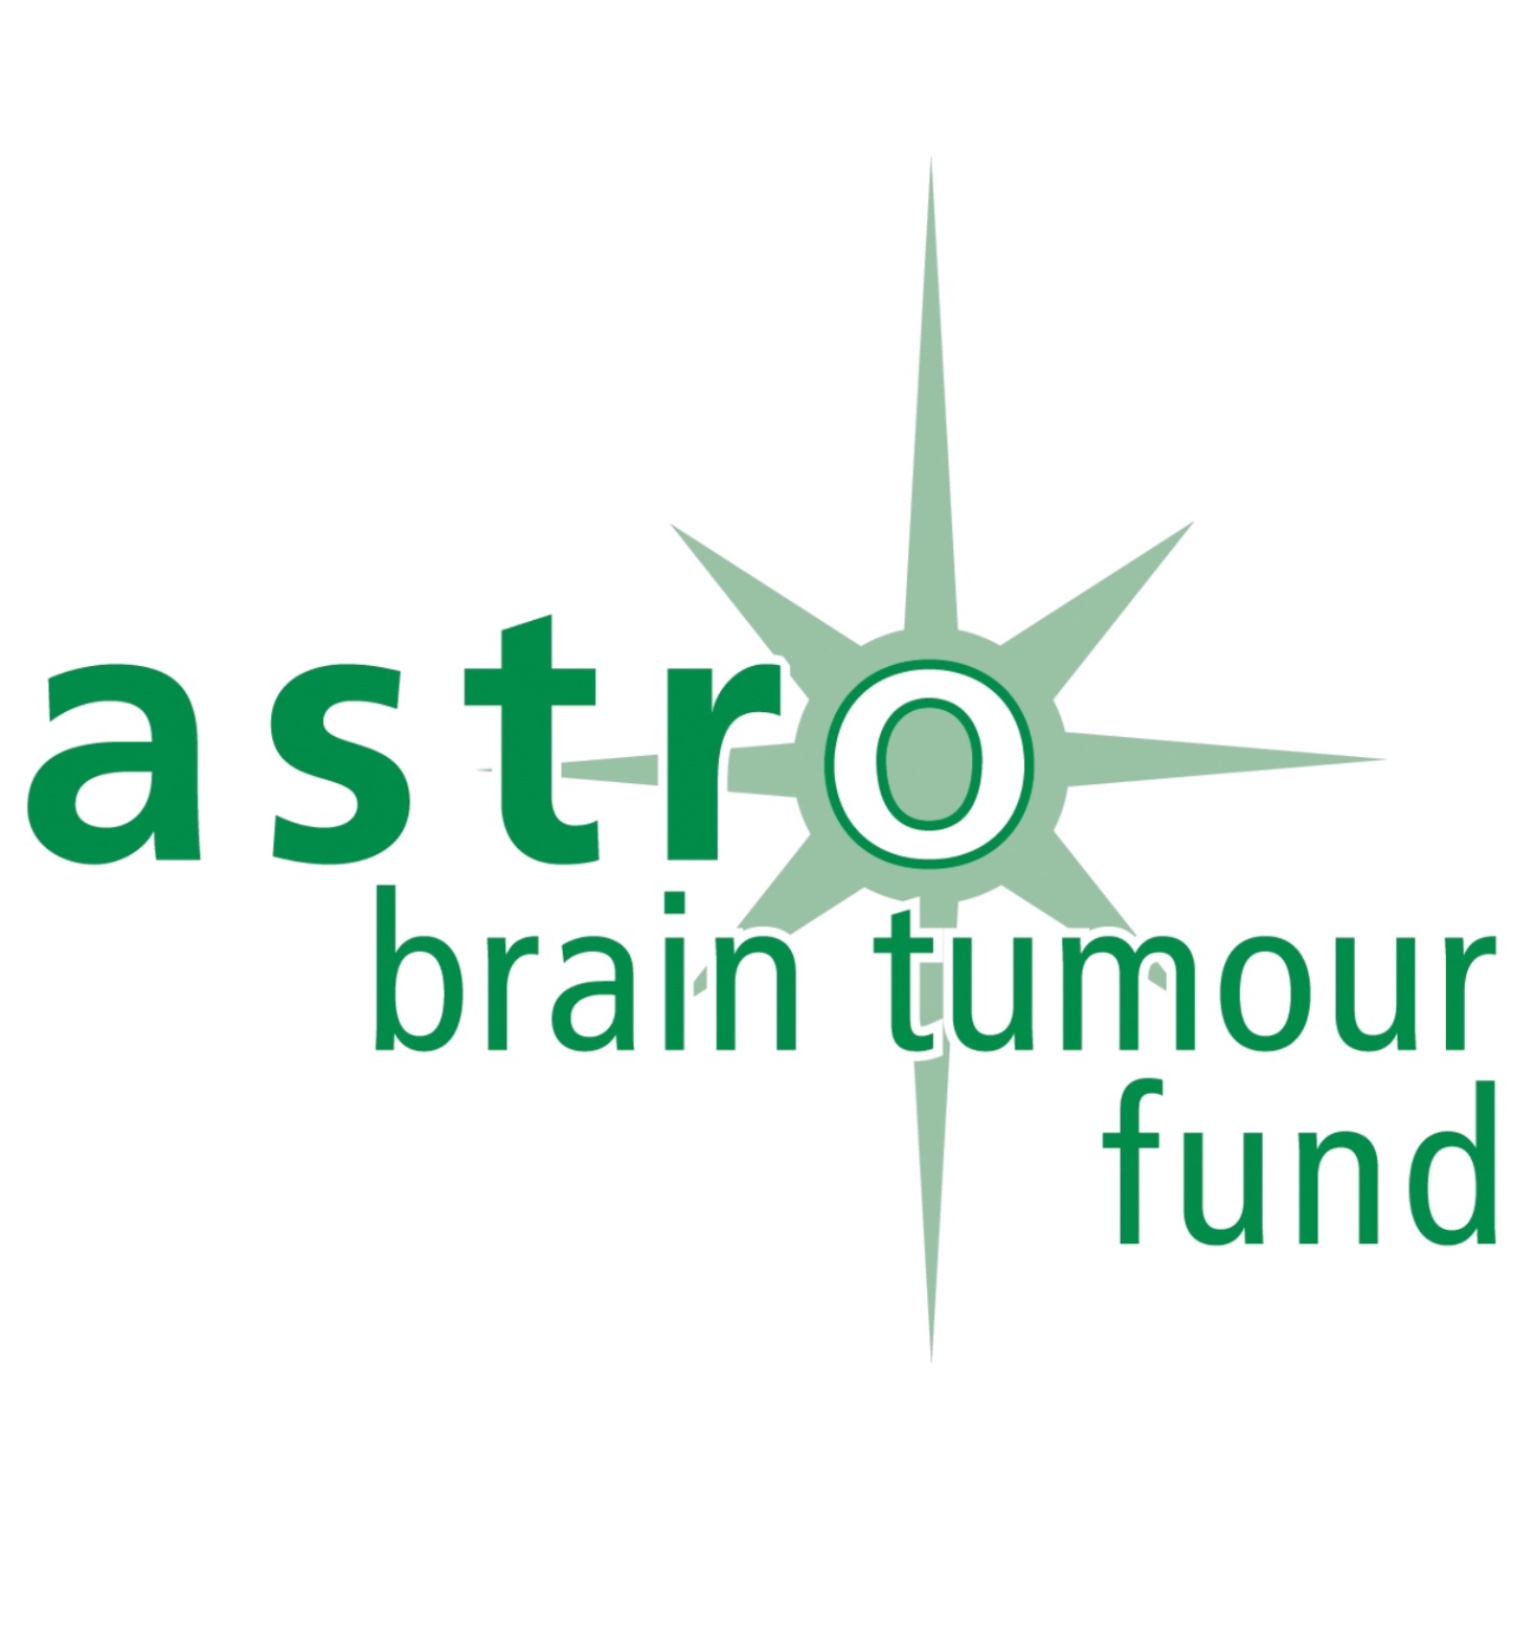 Annual Norfolk Family Walk for Brain Tumours, Holkham Hall, , Holkham, Norfolk, NR23 1RH | An event which brings together those affected by brain tumours. | Astro Brain Tumour Fund